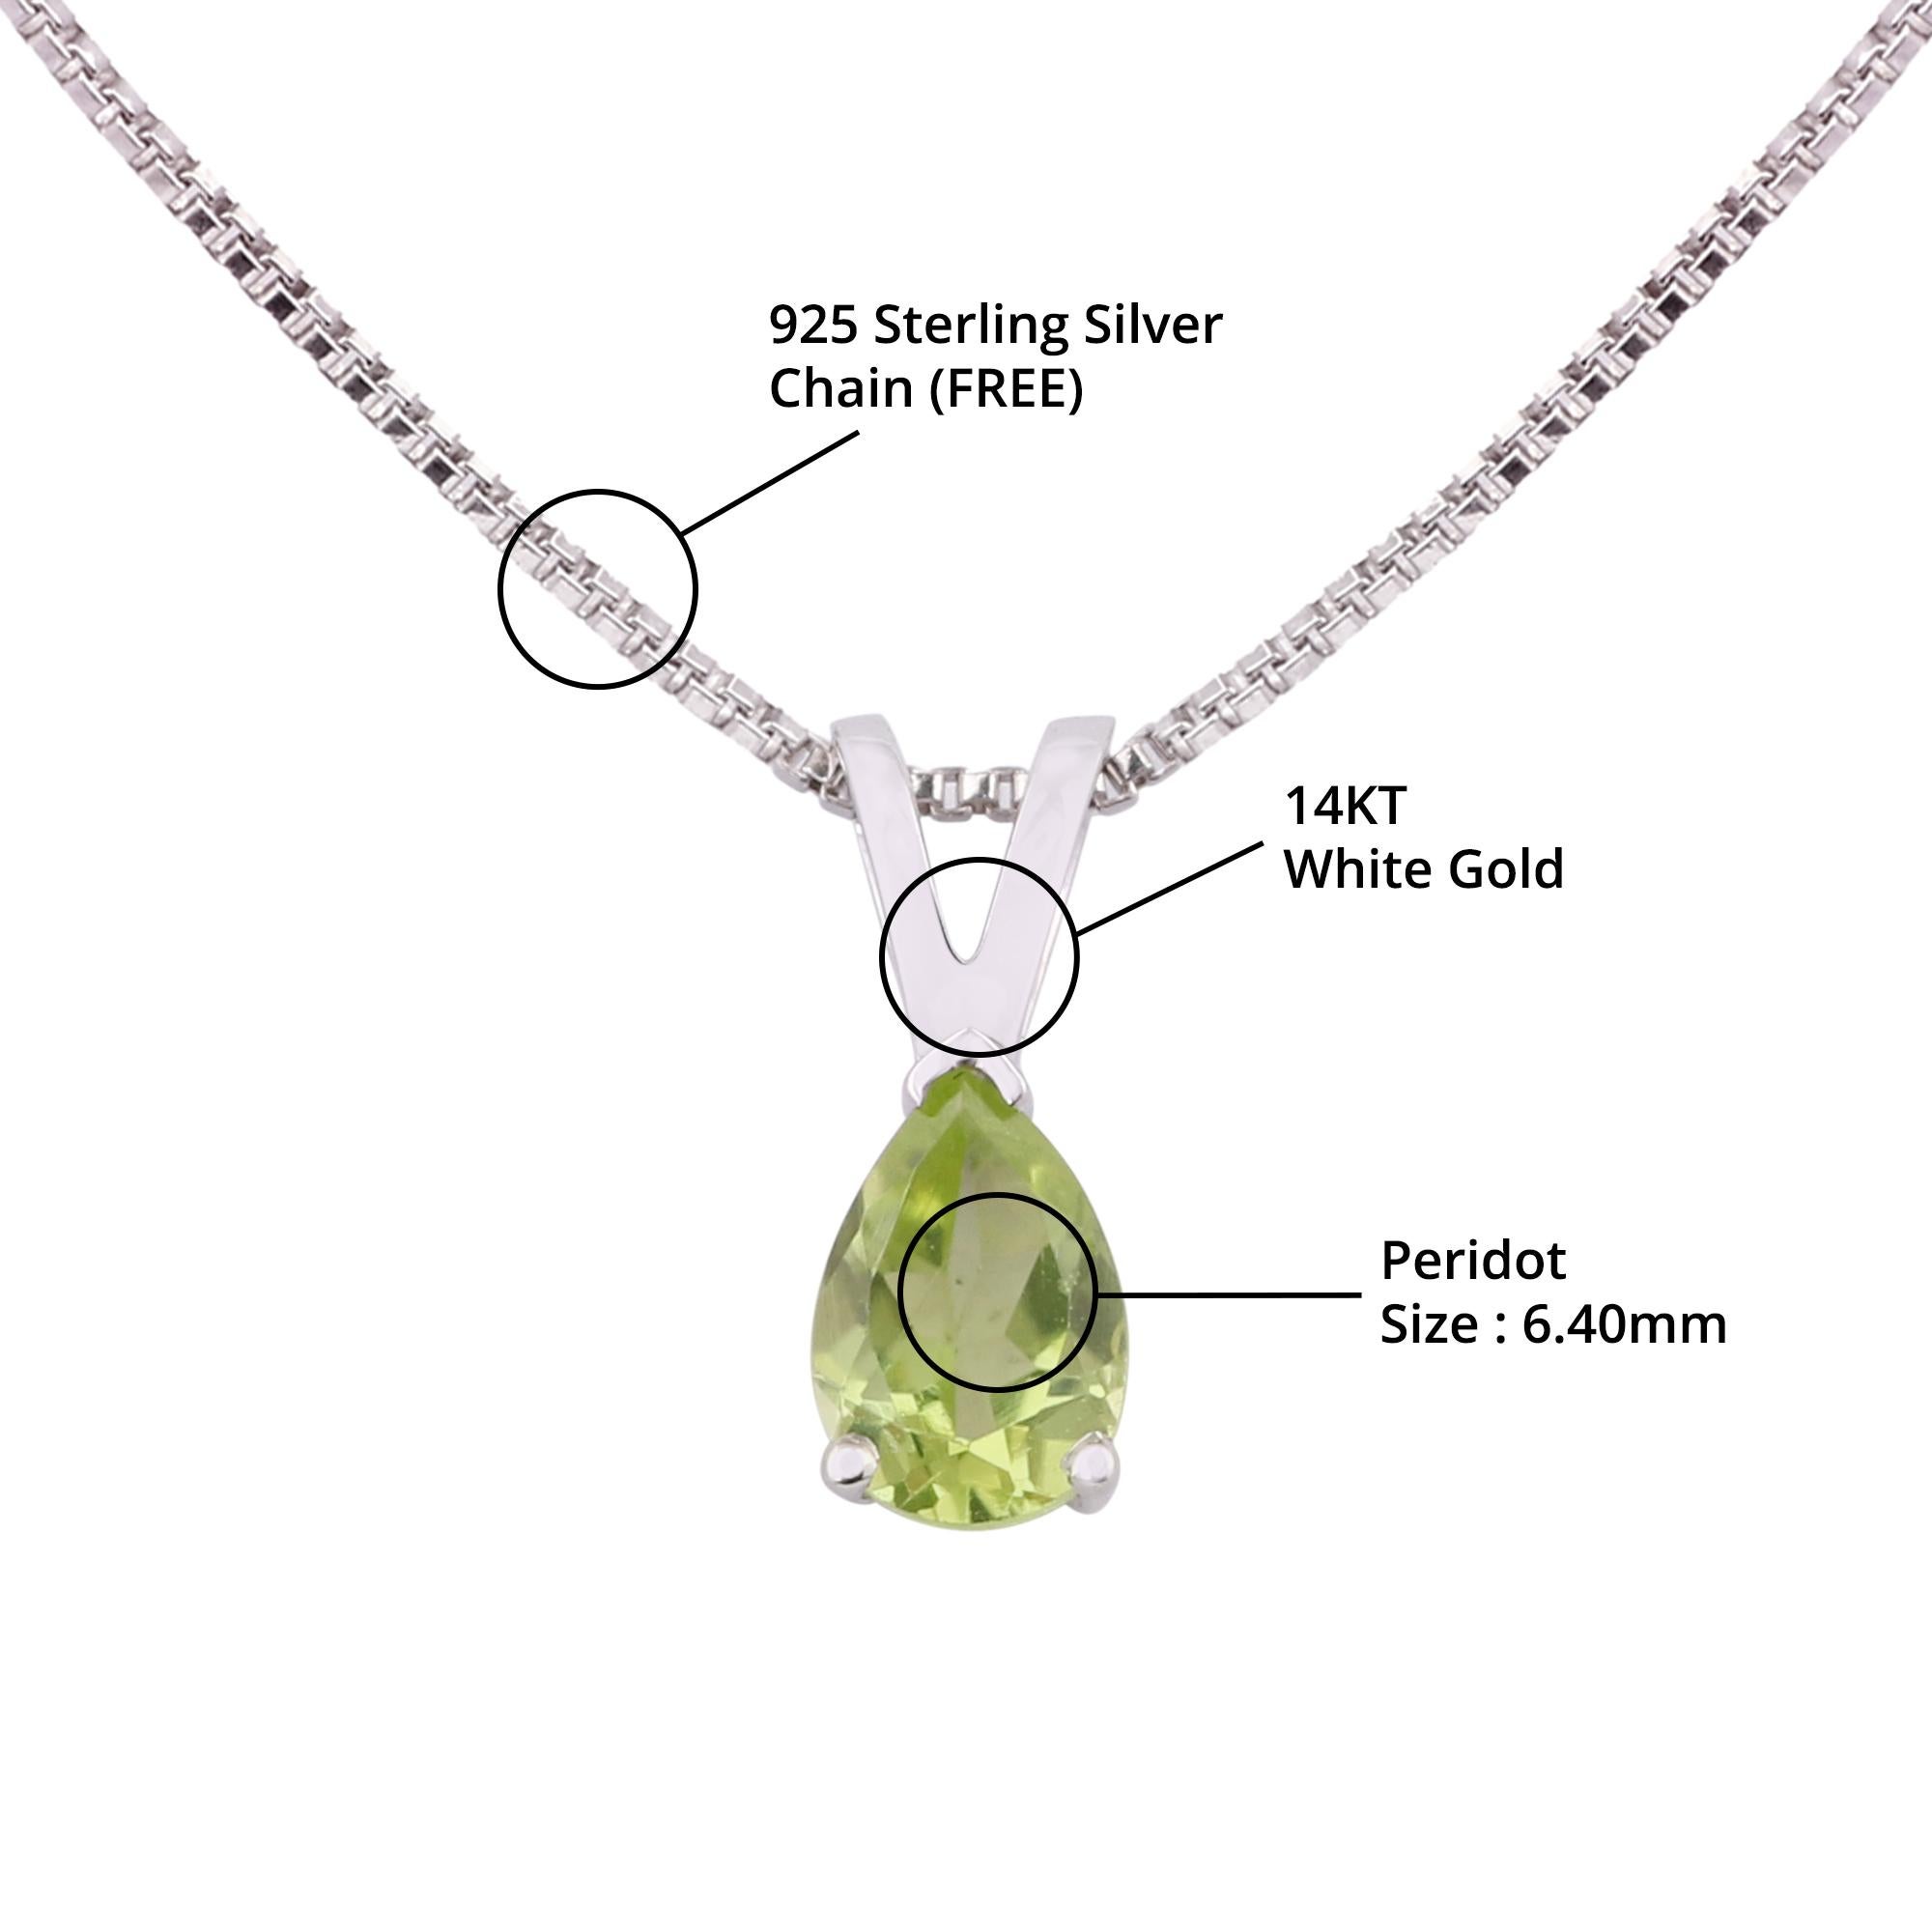 Item details:-

✦ SKU:- JPD00168WWW

✦ Material :- Gold

✦ Metal Purity : 14K White Gold

✦ Gemstone Specification:- 
✧ Natural Pear Peridot - 6.40mm - 1 Pc


✦ Approx. Pear Natural Peridot Weight : 0.490 Carat


✦ Approx. Item Gross Weight:- 0.380